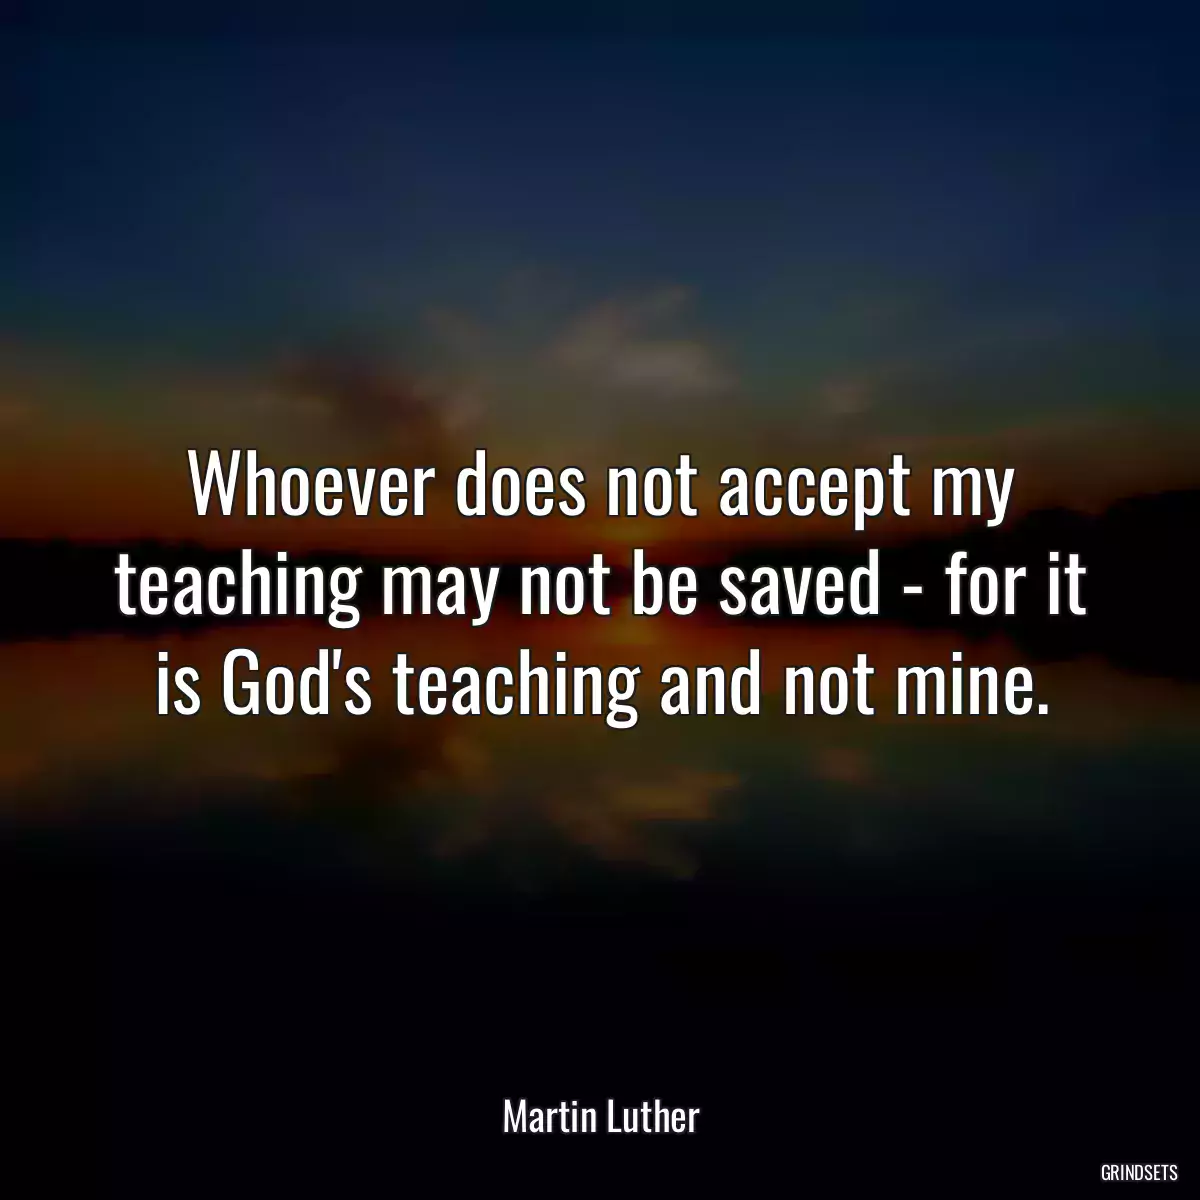 Whoever does not accept my teaching may not be saved - for it is God\'s teaching and not mine.